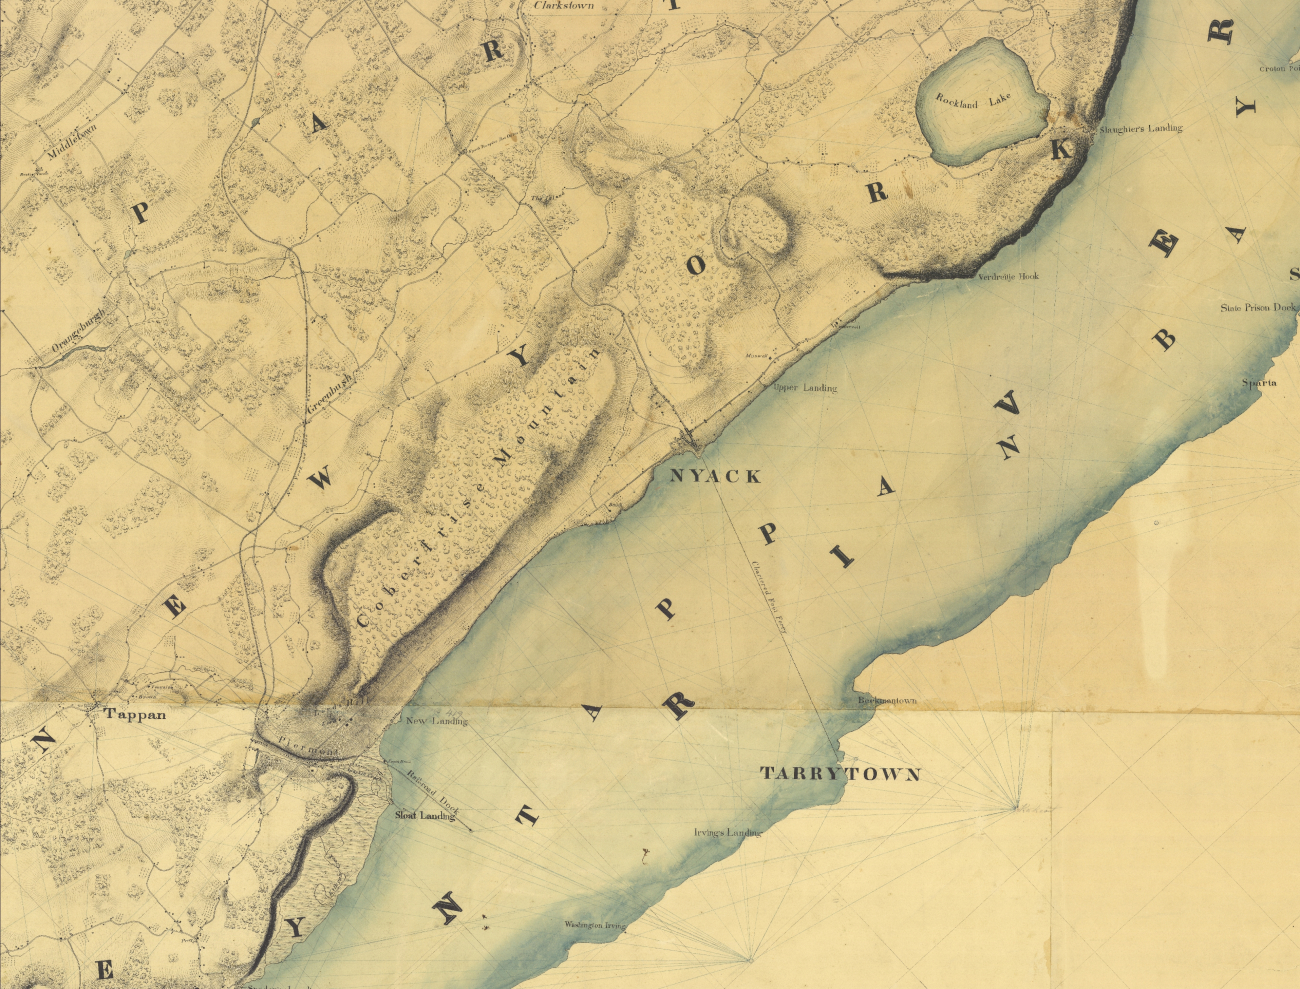 Topographic shoreline manuscript showing section of Hudson River  in thevicinity of today's Tappan Zee Bridge